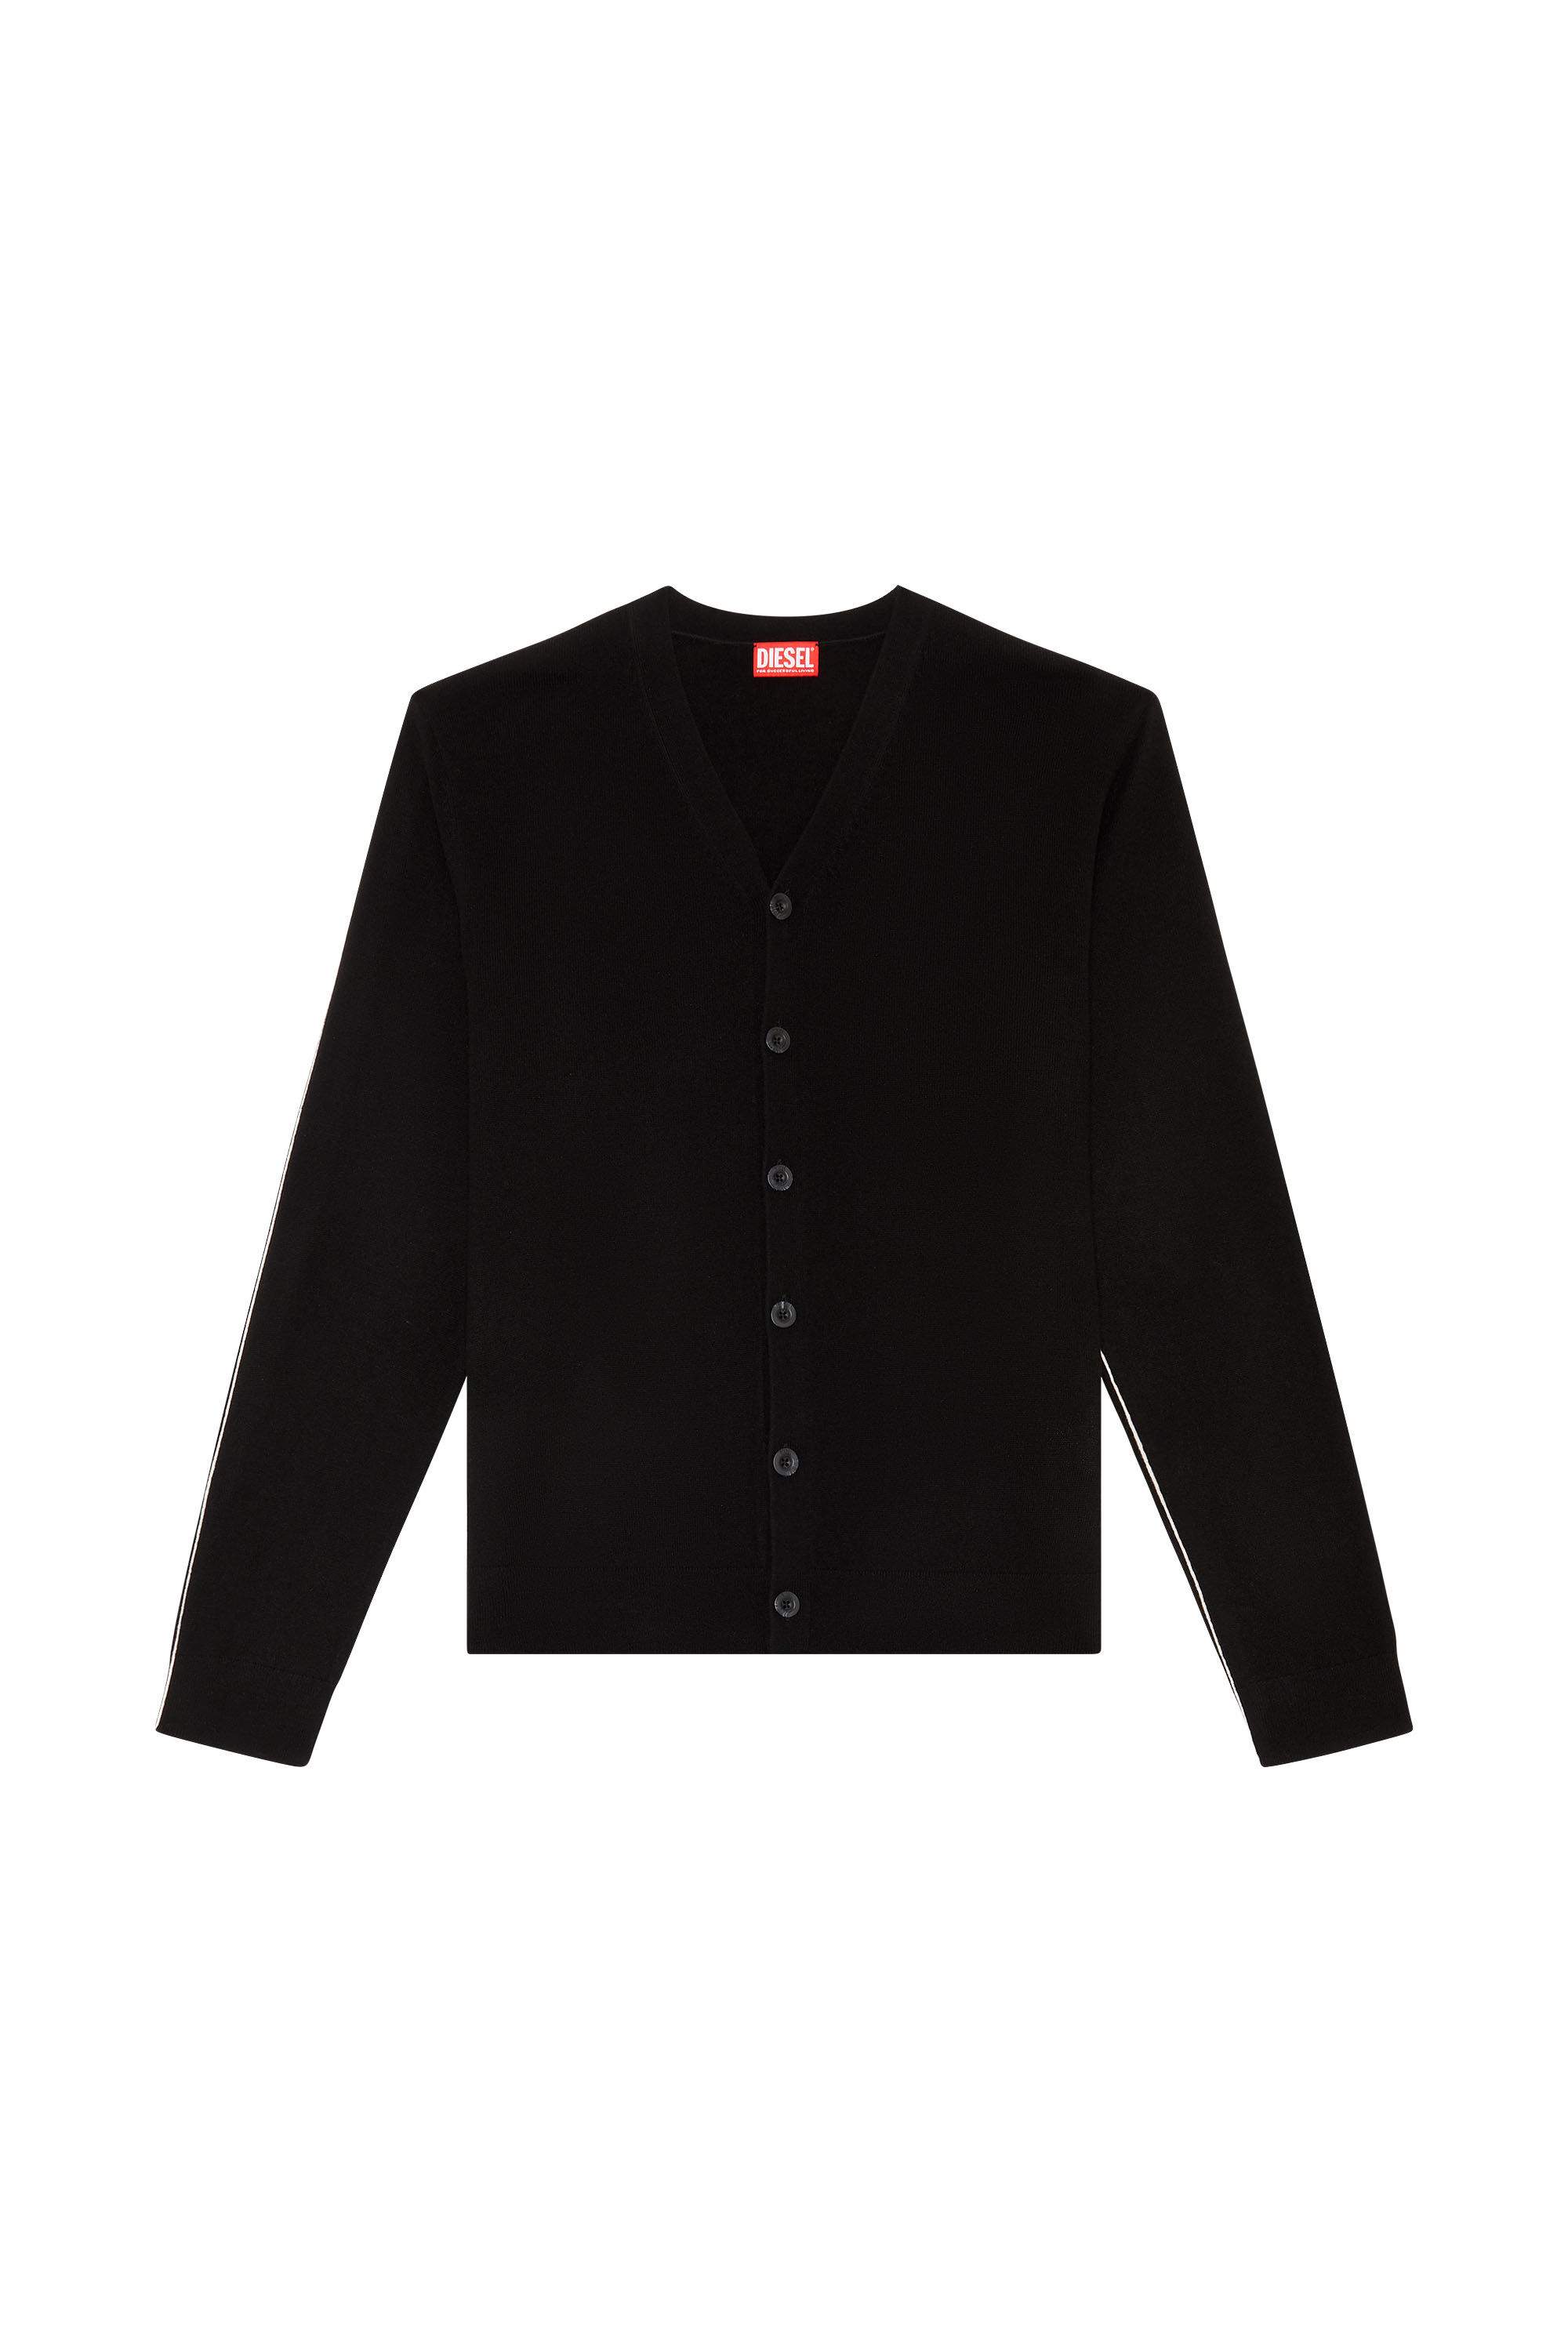 Men's Cardigan with contrast piping | Black | Diesel